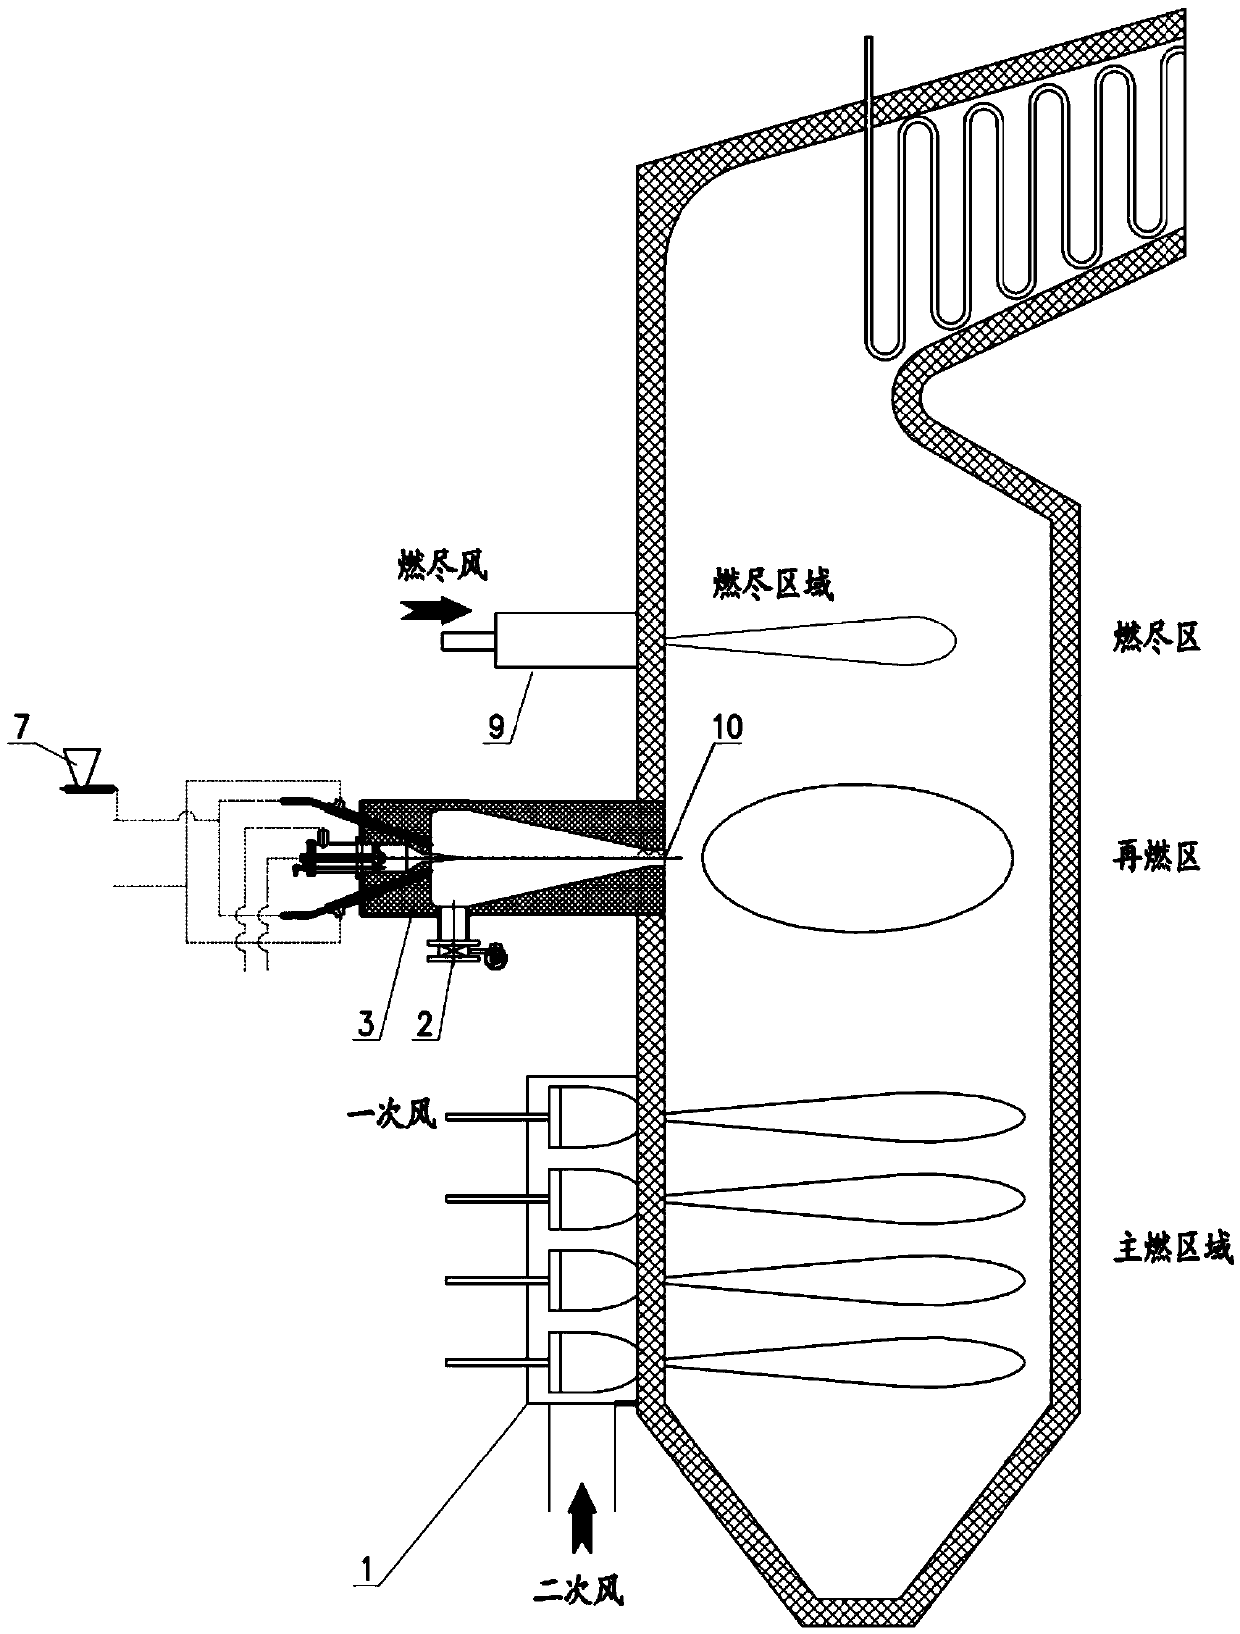 Pulverized coal flame preheating reburning system